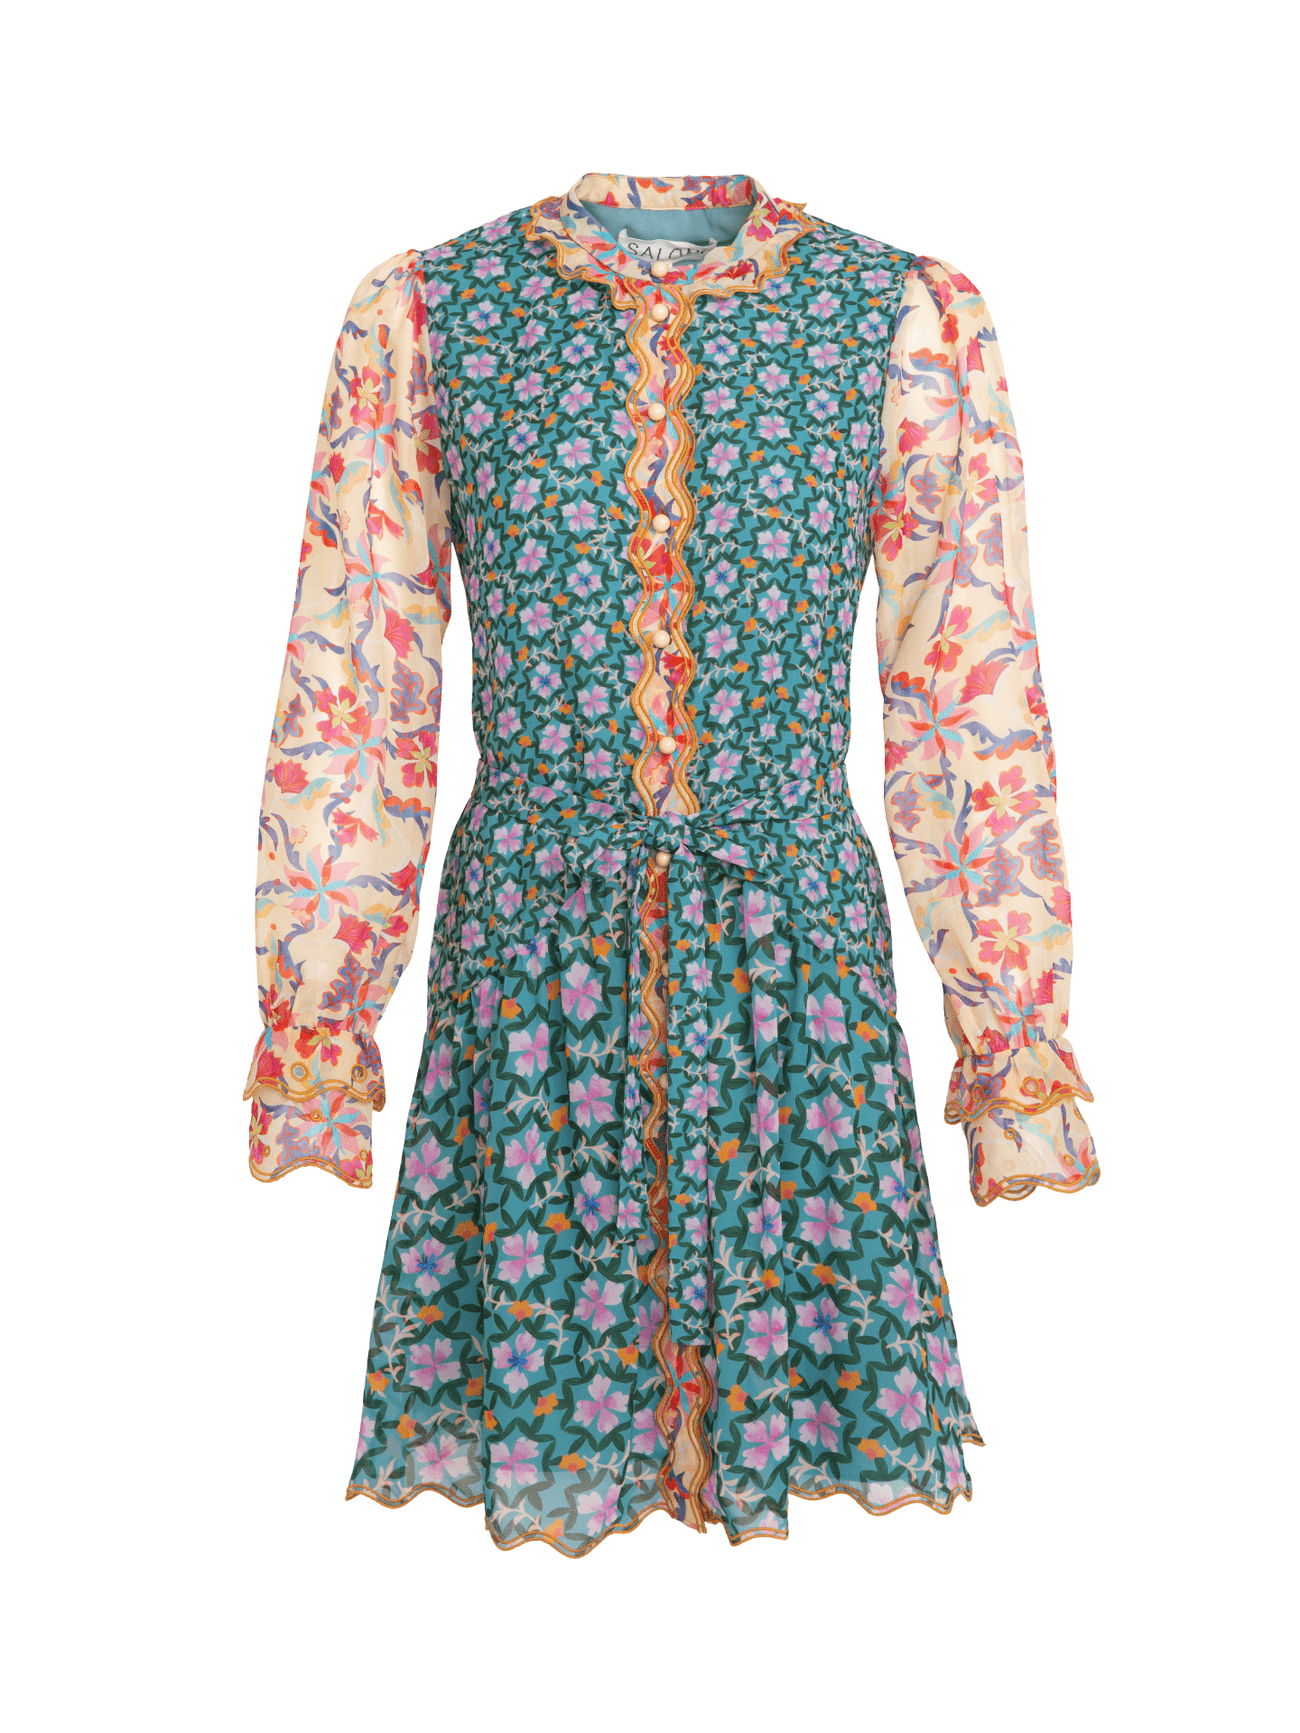 Load image into Gallery viewer, Tilly Ruffle Eyelet B Dress in Sorrel Teal Bloom